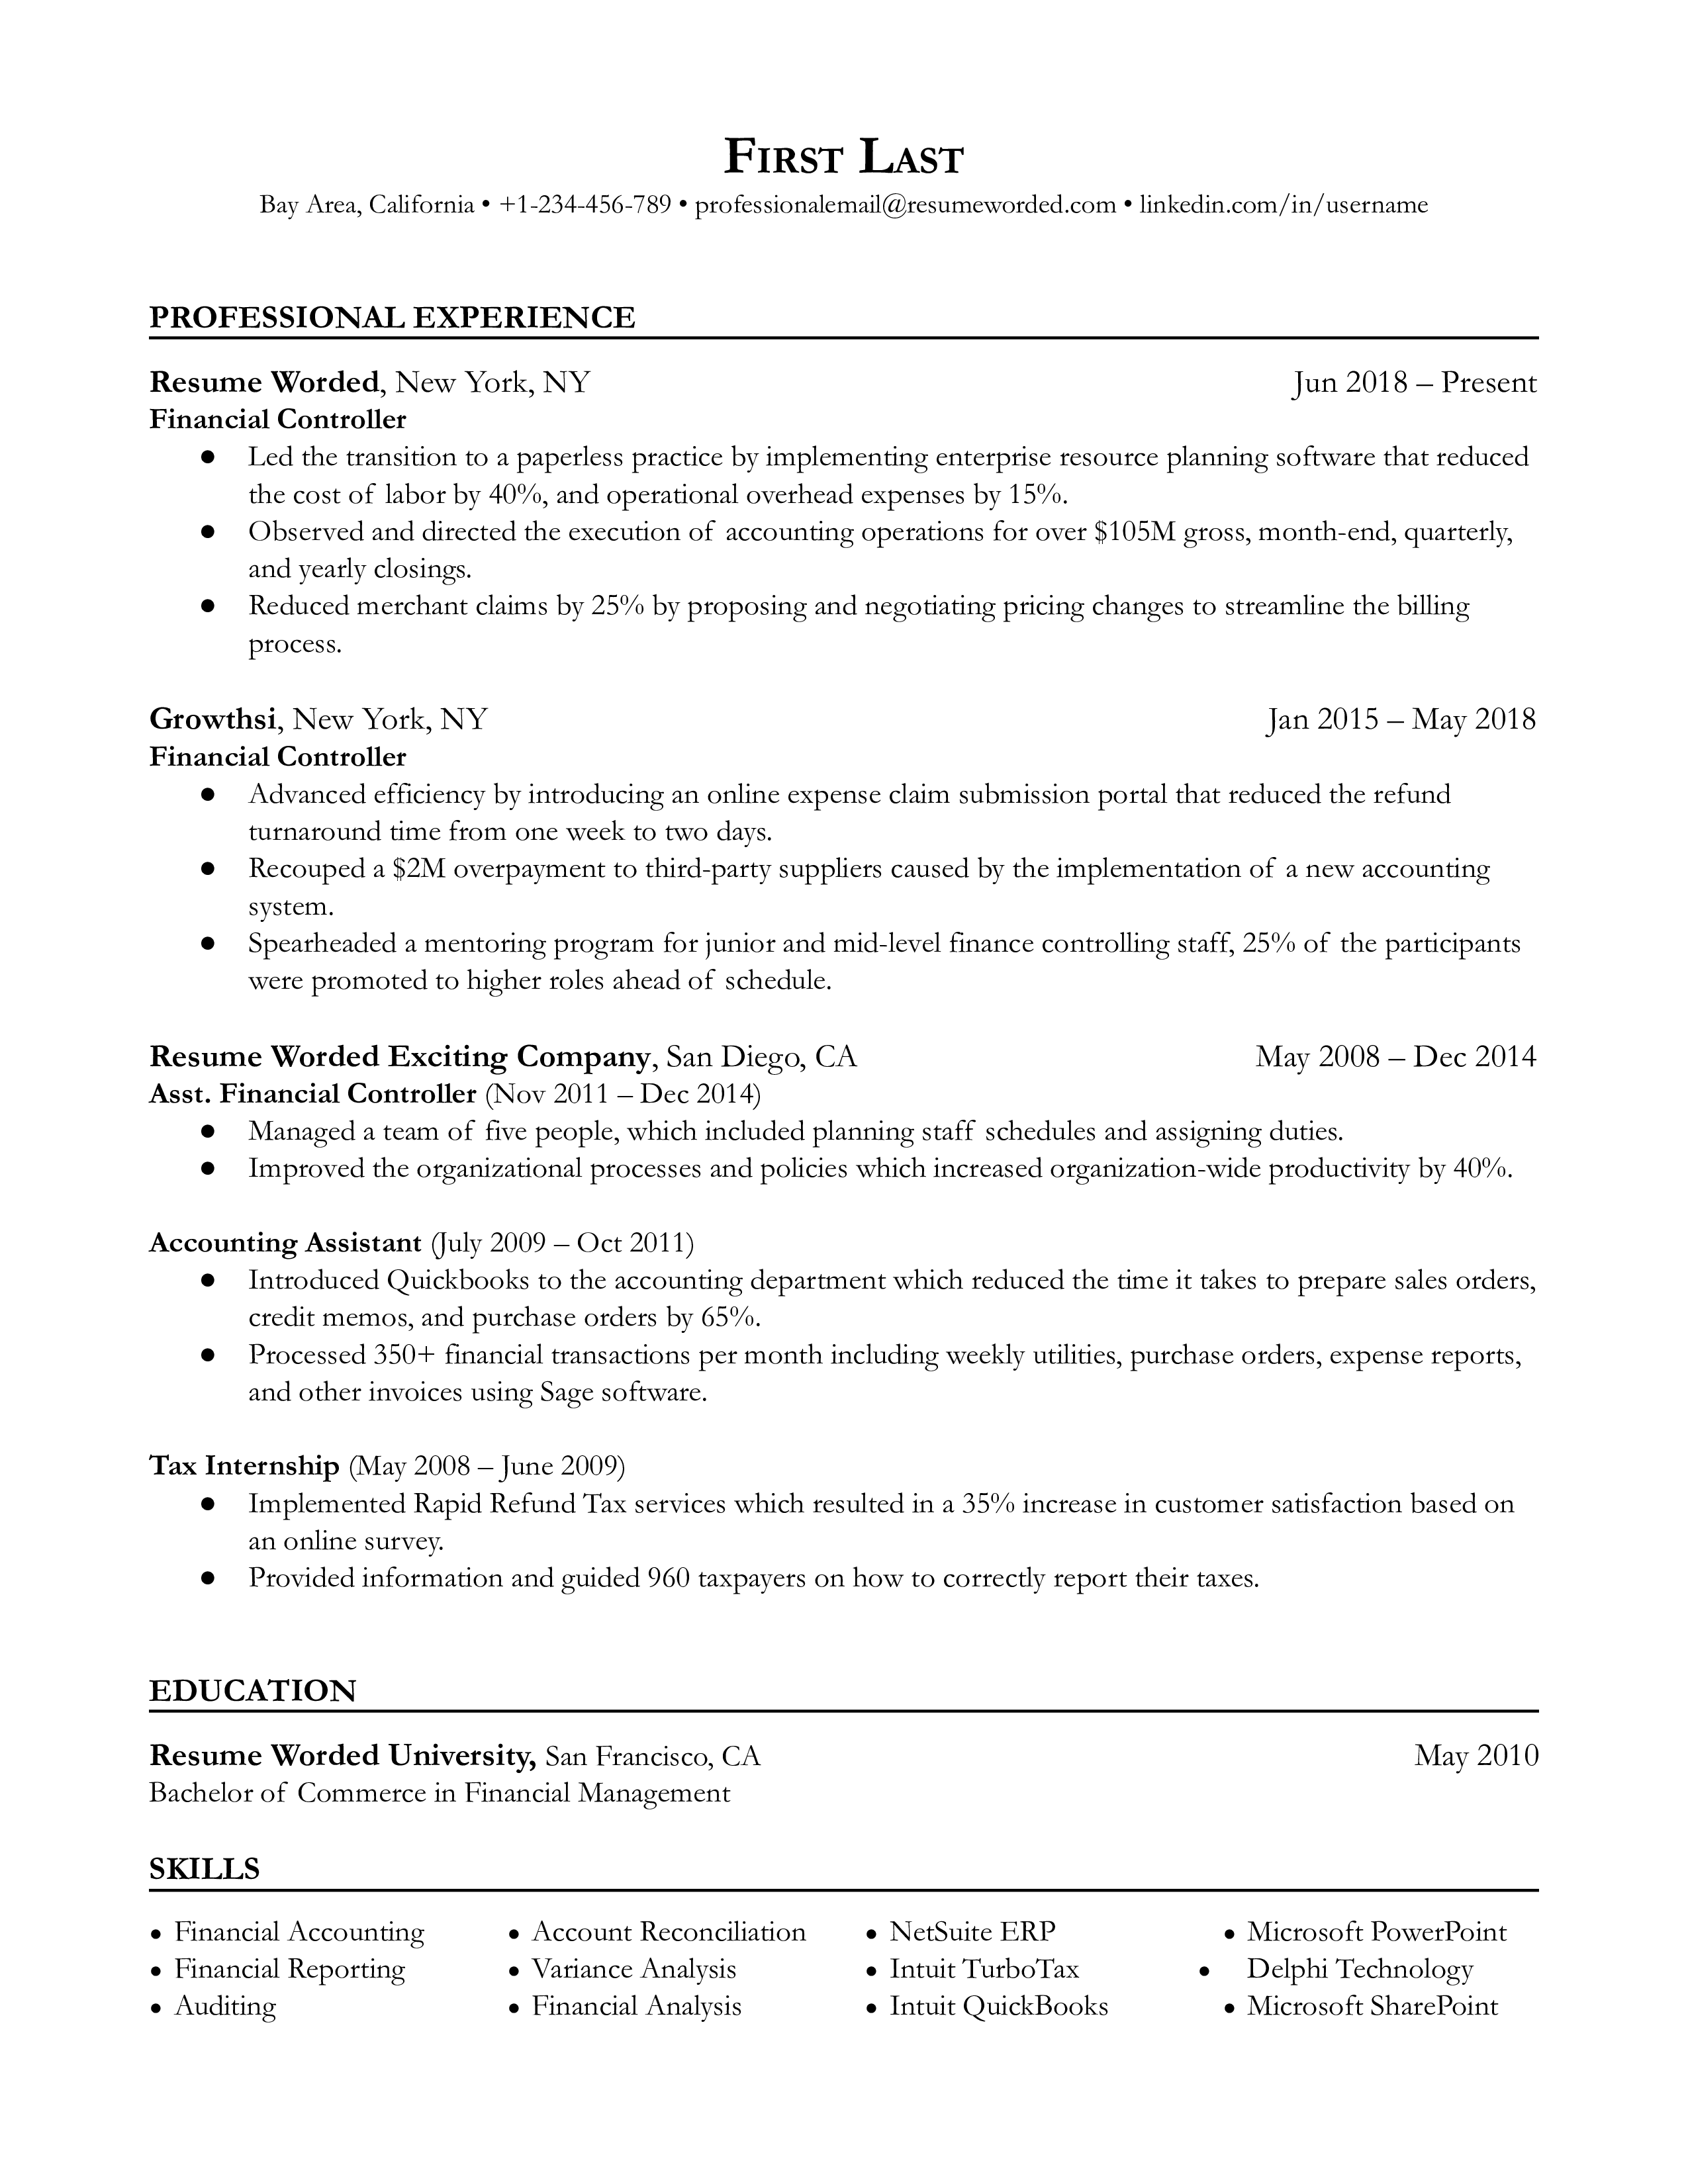 A financial controller resume sample with two tips to help you elevate your resume.